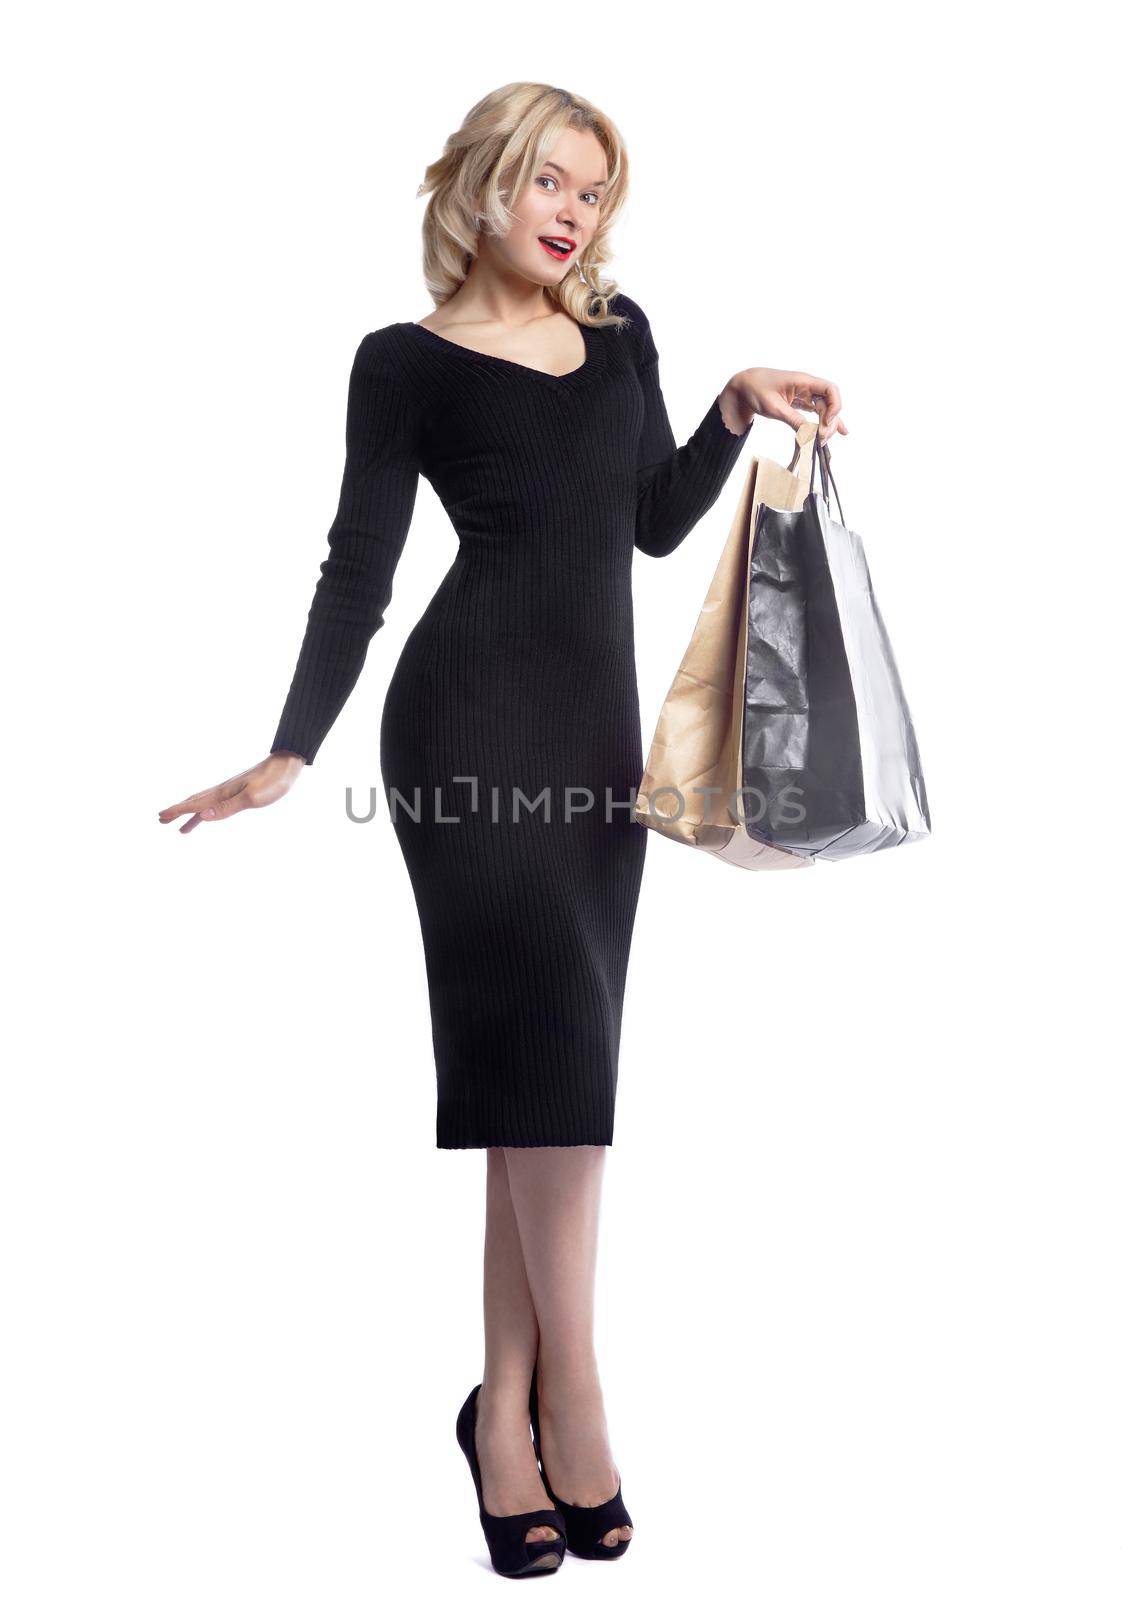 Shopping young woman holding bags isolated on white studio background. Love fashion and sales. Happy blond girl in black luxury glomour dress, shopper with handbags and gifts.